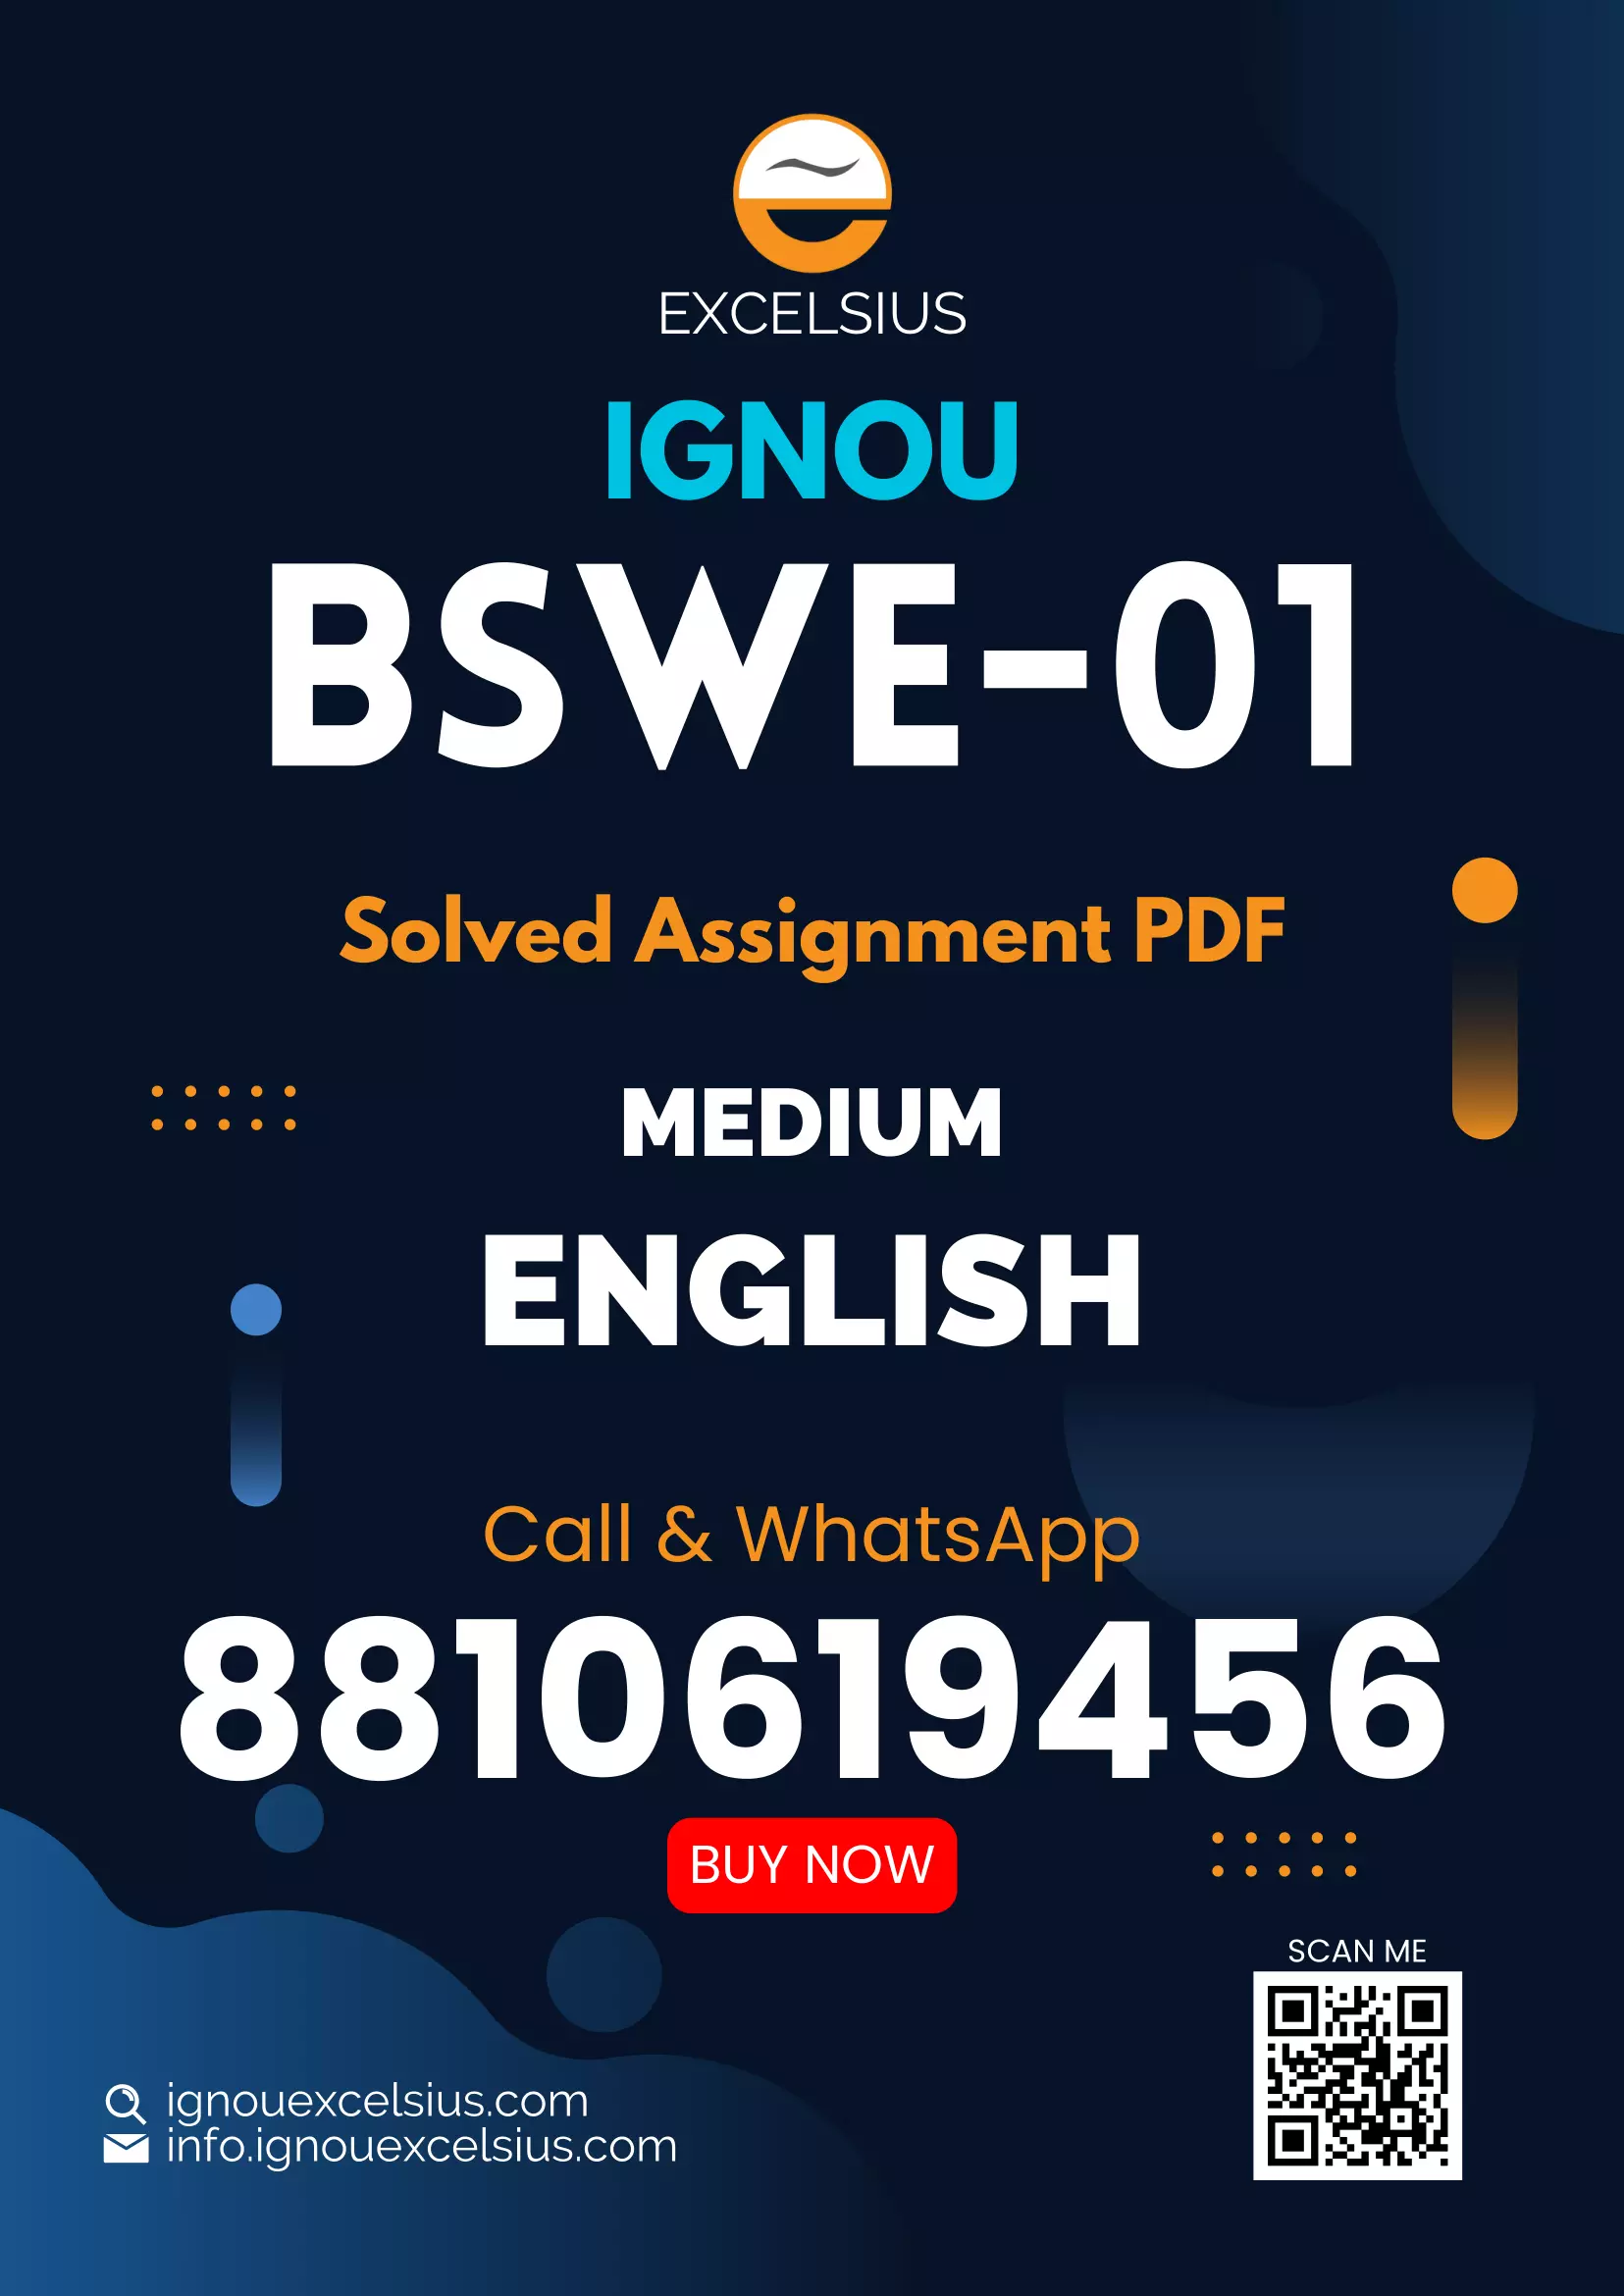 IGNOU BSWE-01 - Introduction to Social Work, Latest Solved Assignment-July 2022 – January 2023